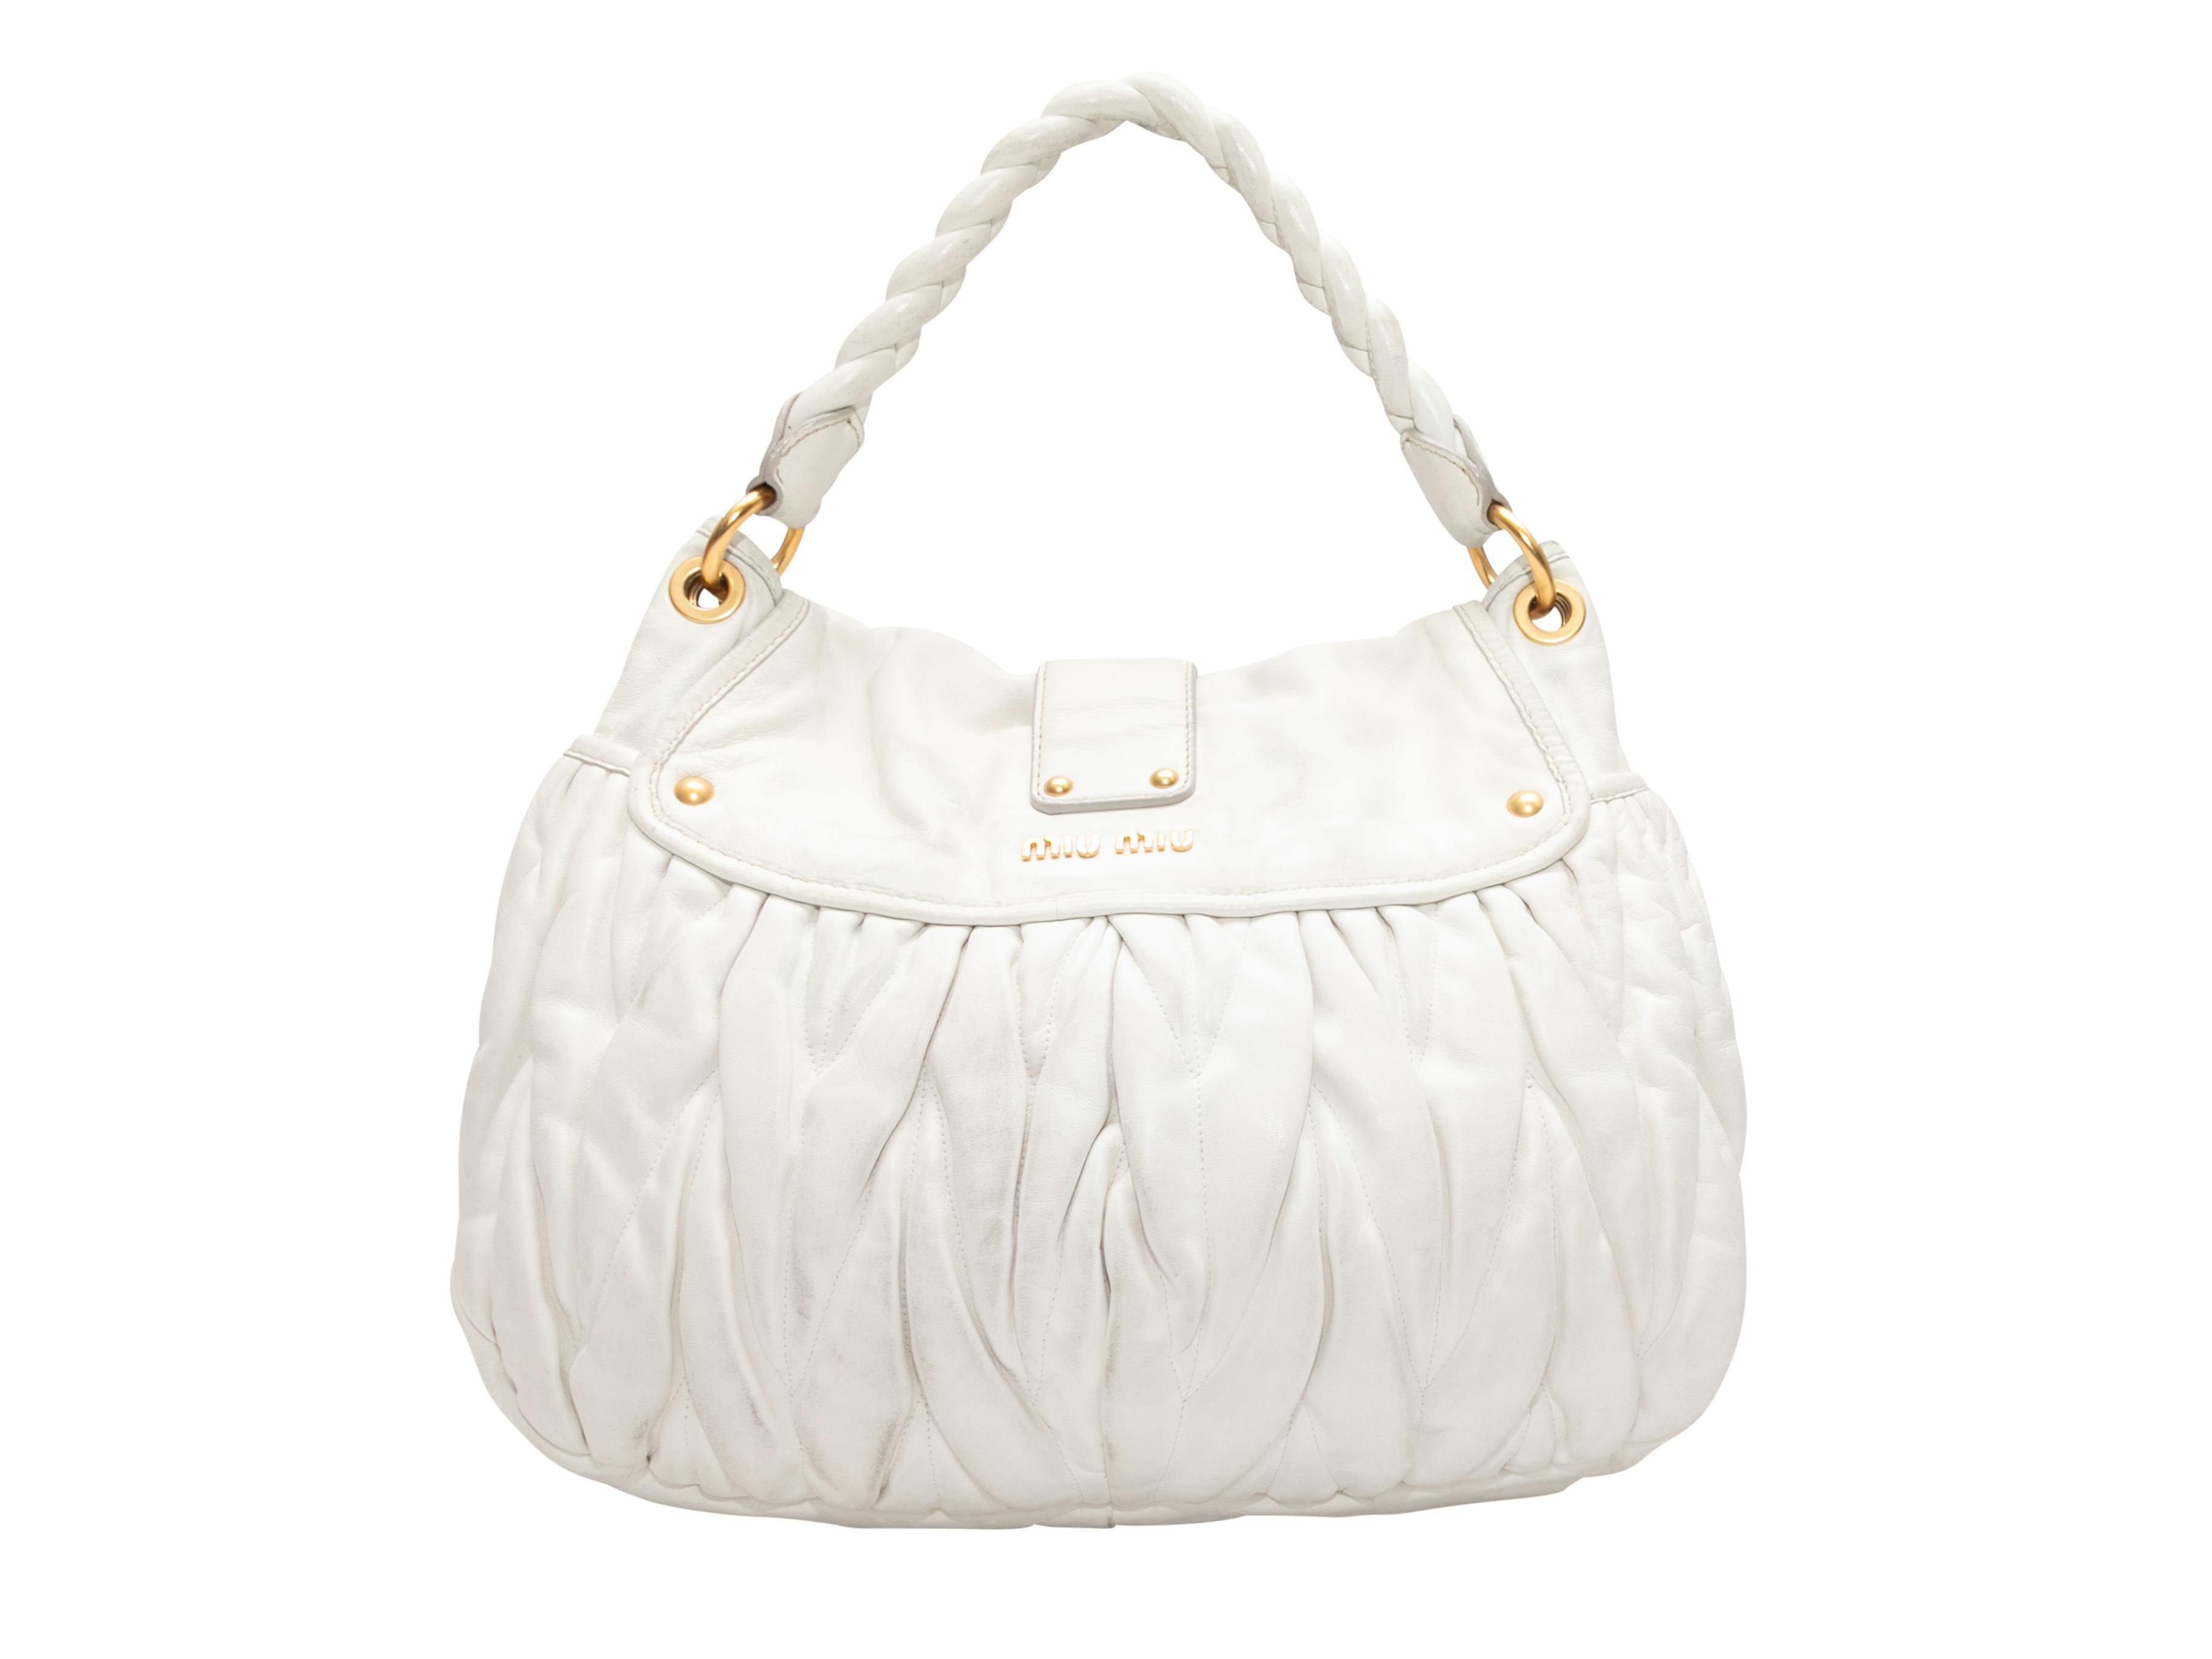 White Miu Miu Matelasse Shoulder Bag. This shoulder bag features a leather body, gold-tone hardware, a single braided shoulder strap, and a front push-lock closure. 15